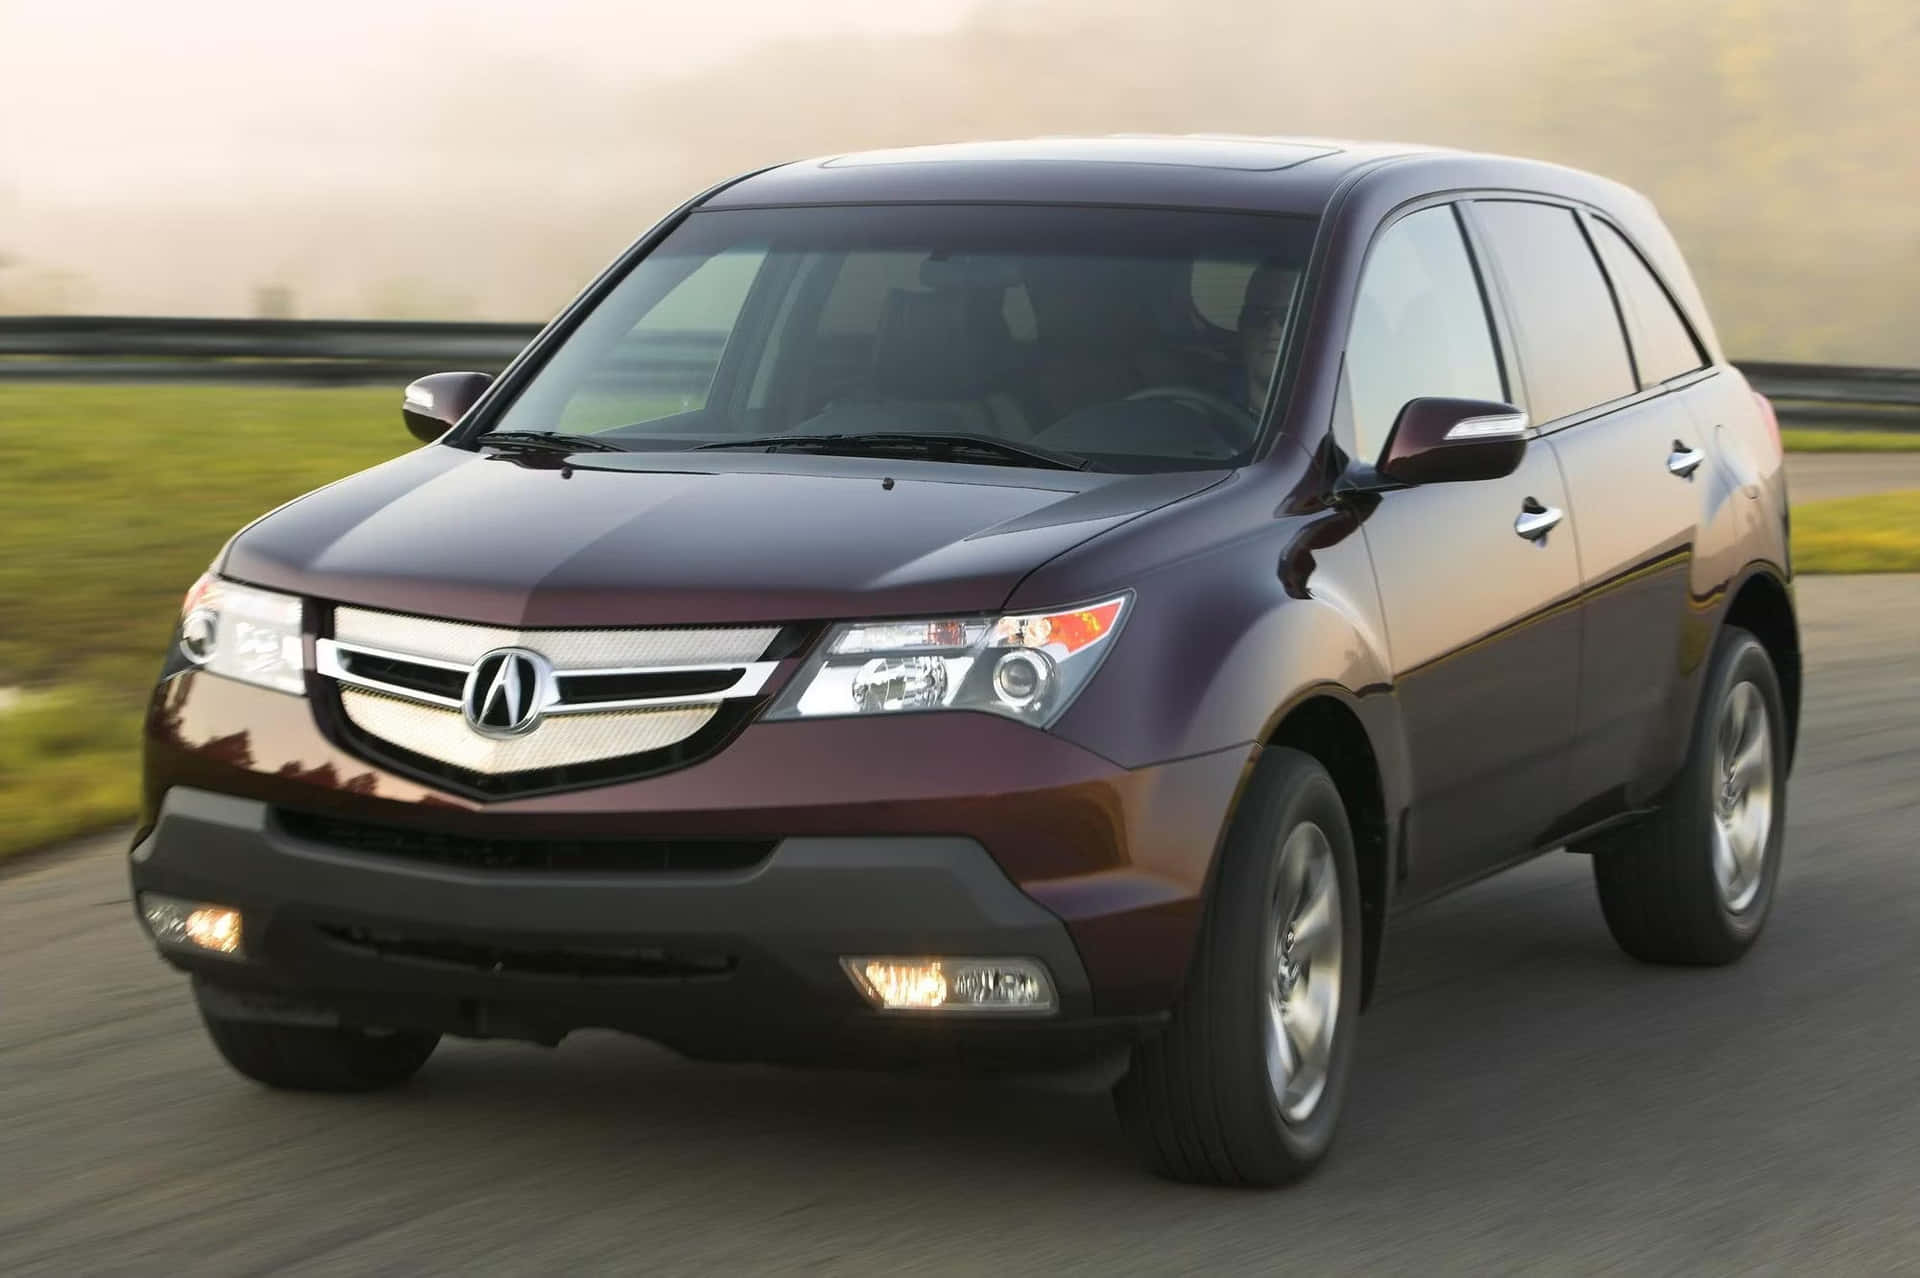 Get ready for your drive in an Acura, the ultimate luxury performance car brand.